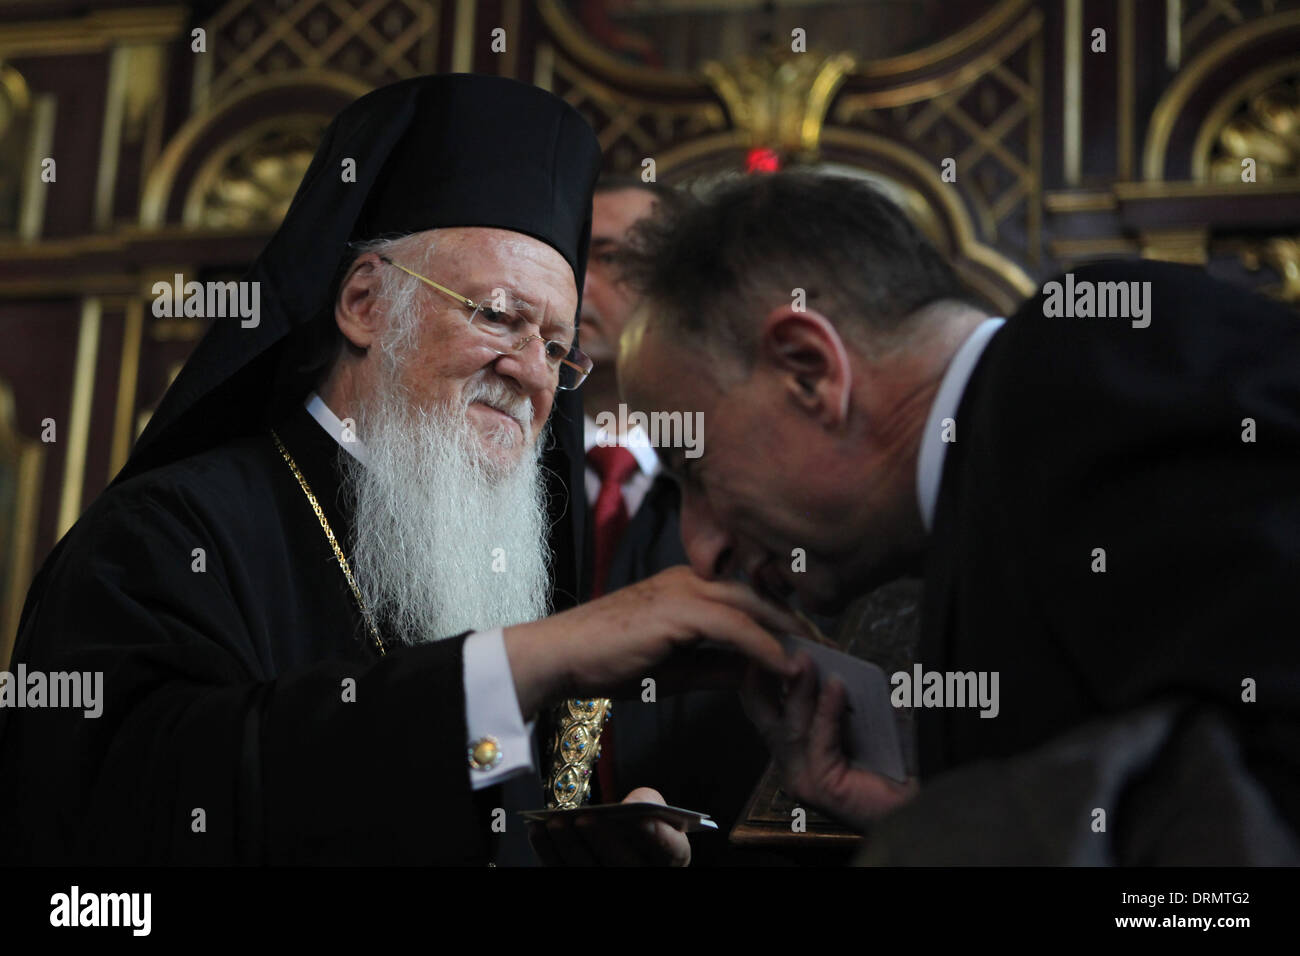 Patriarch Bartholomew I of Constantinople blesses to the Orthodox believers during his visit to Prague, Czech Republic. Stock Photo